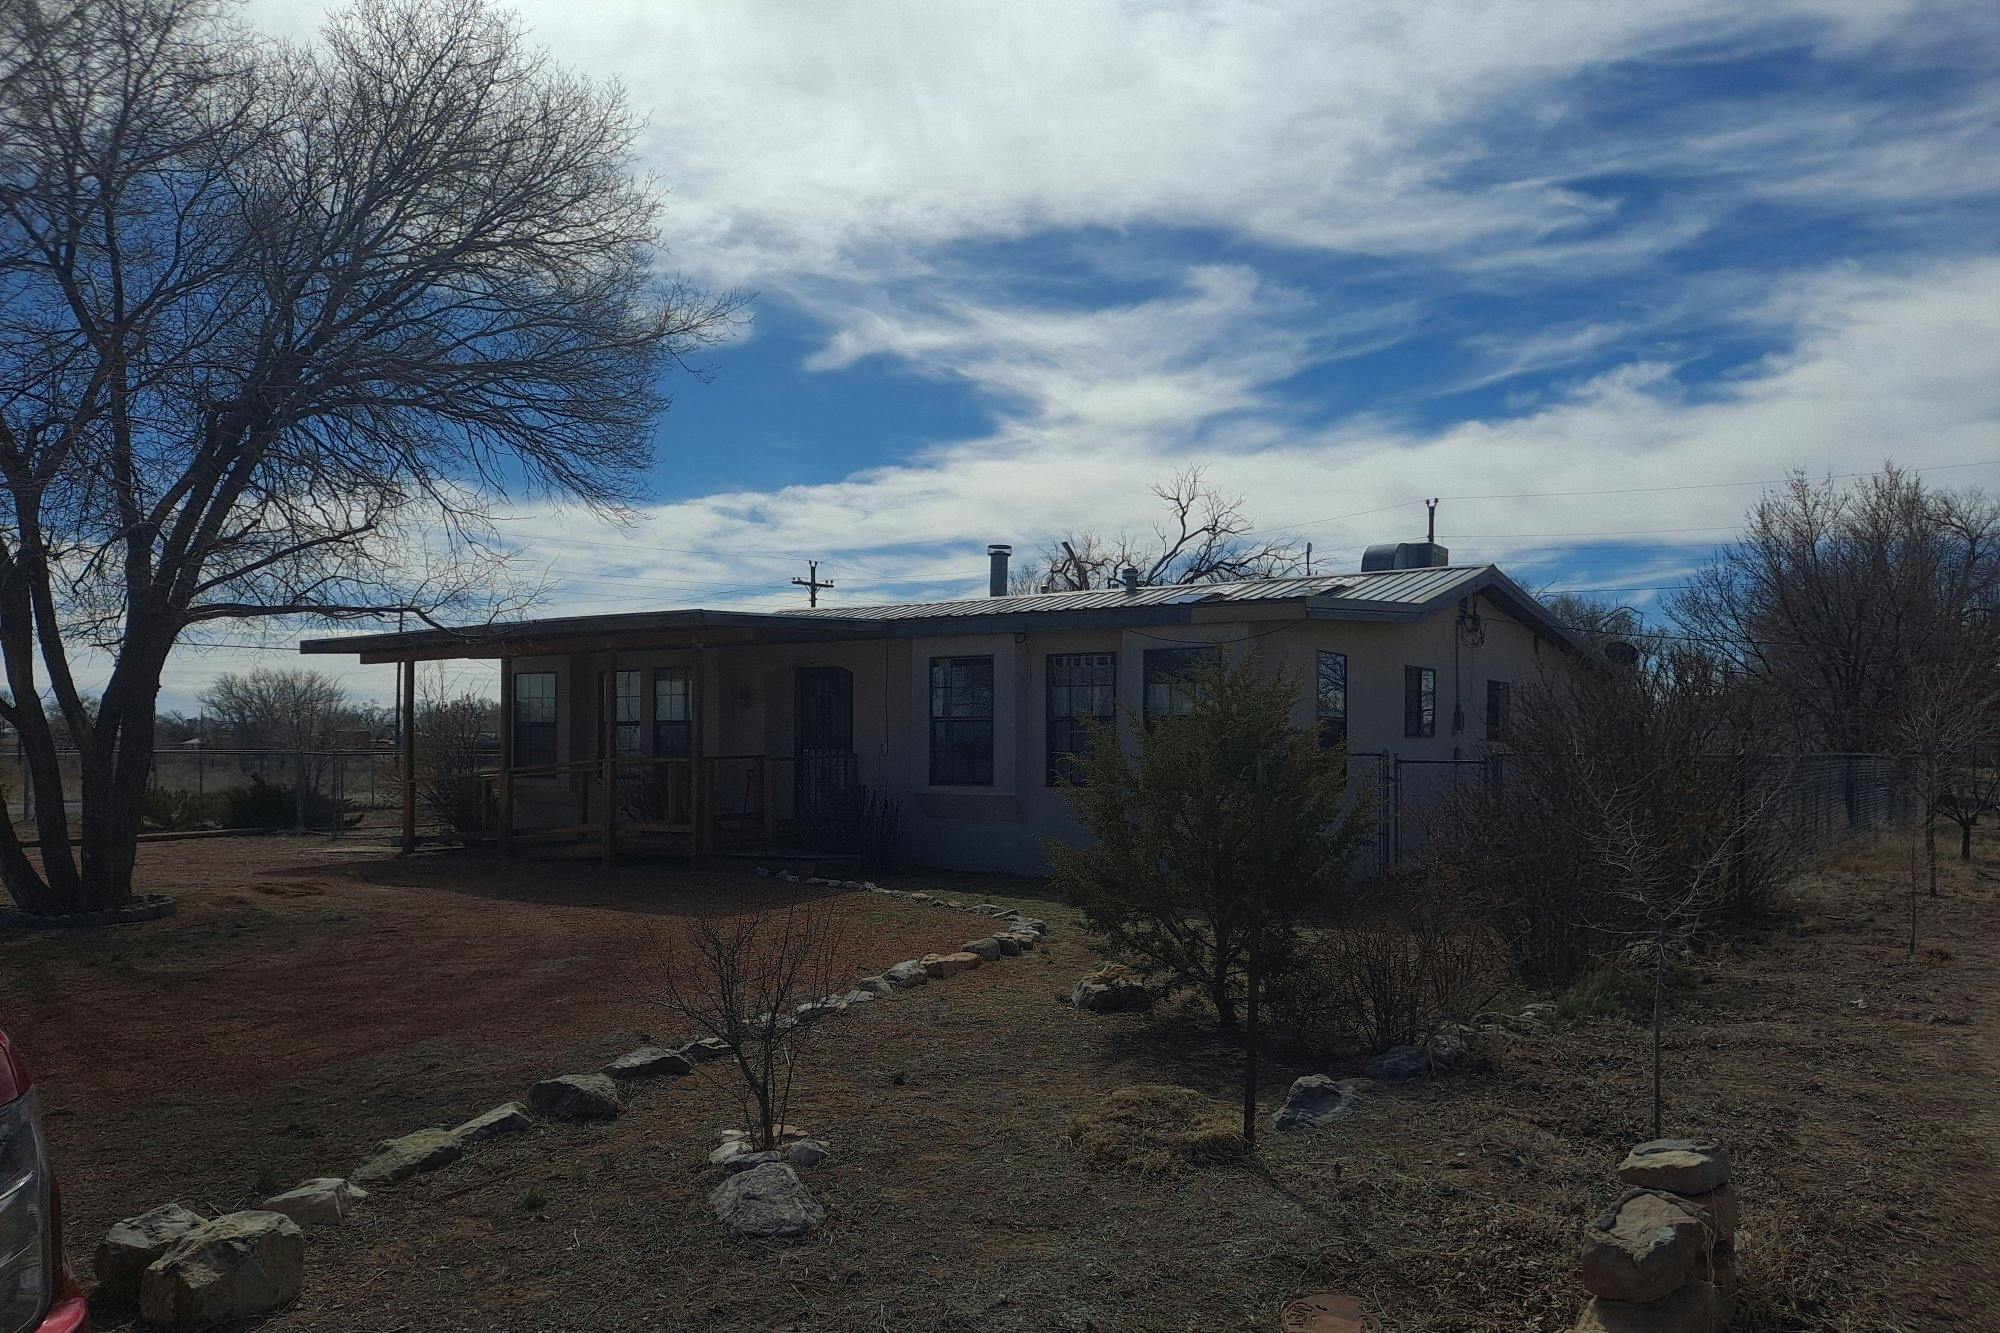 Katherine Ave, Moriarty, NM 87035 #1